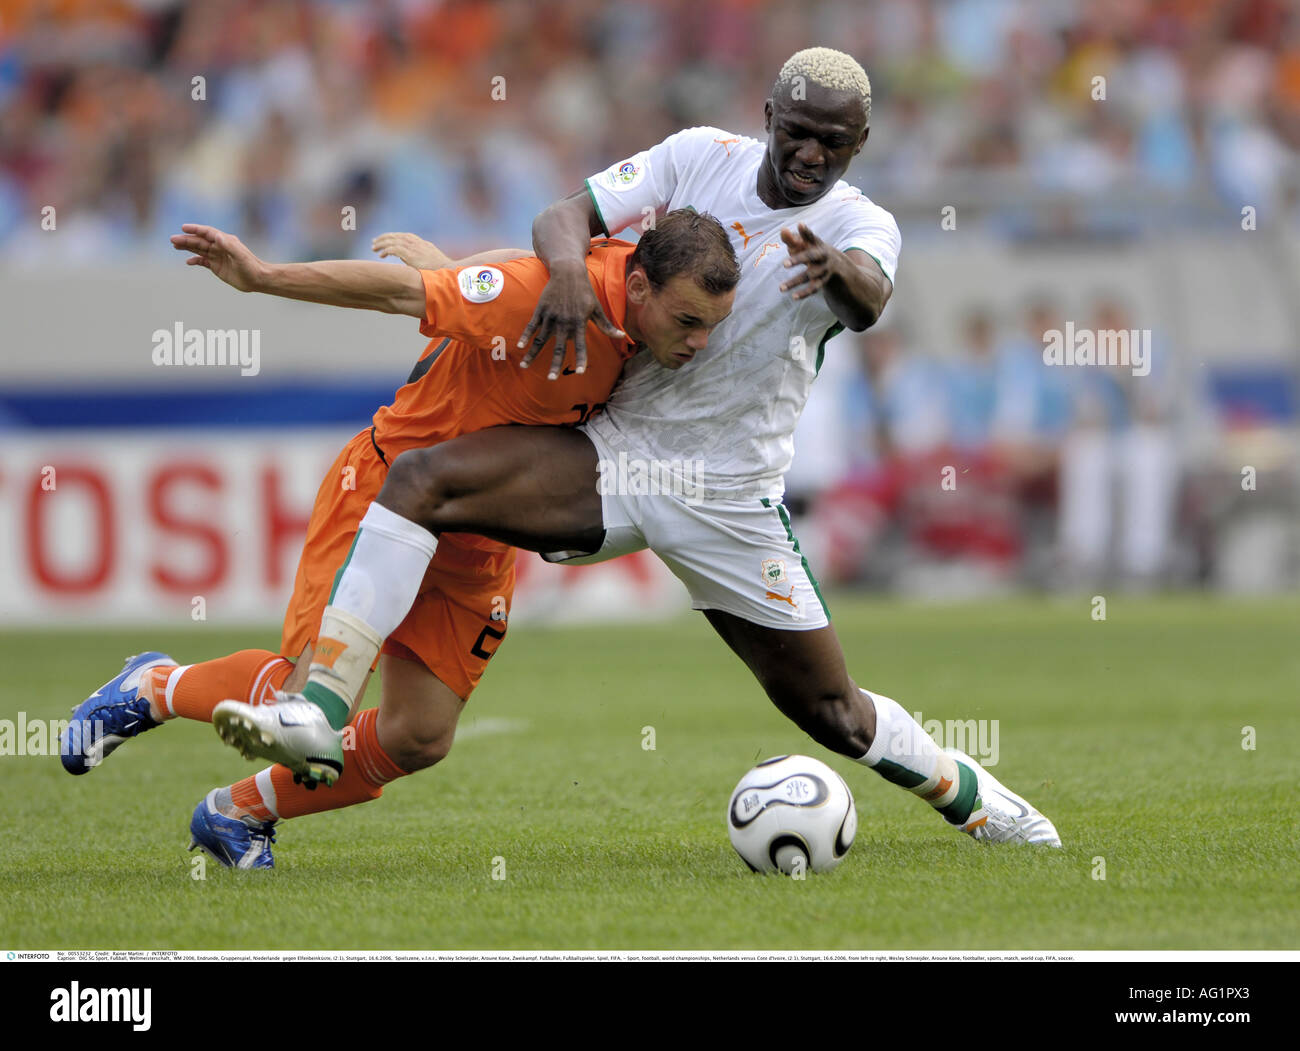 Sport, football, world championships, Netherlands versus Cote d'Ivoire, (2:1), Stuttgart, 16.6.2006, Additional-Rights-Clearance-Info-Not-Available Stock Photo